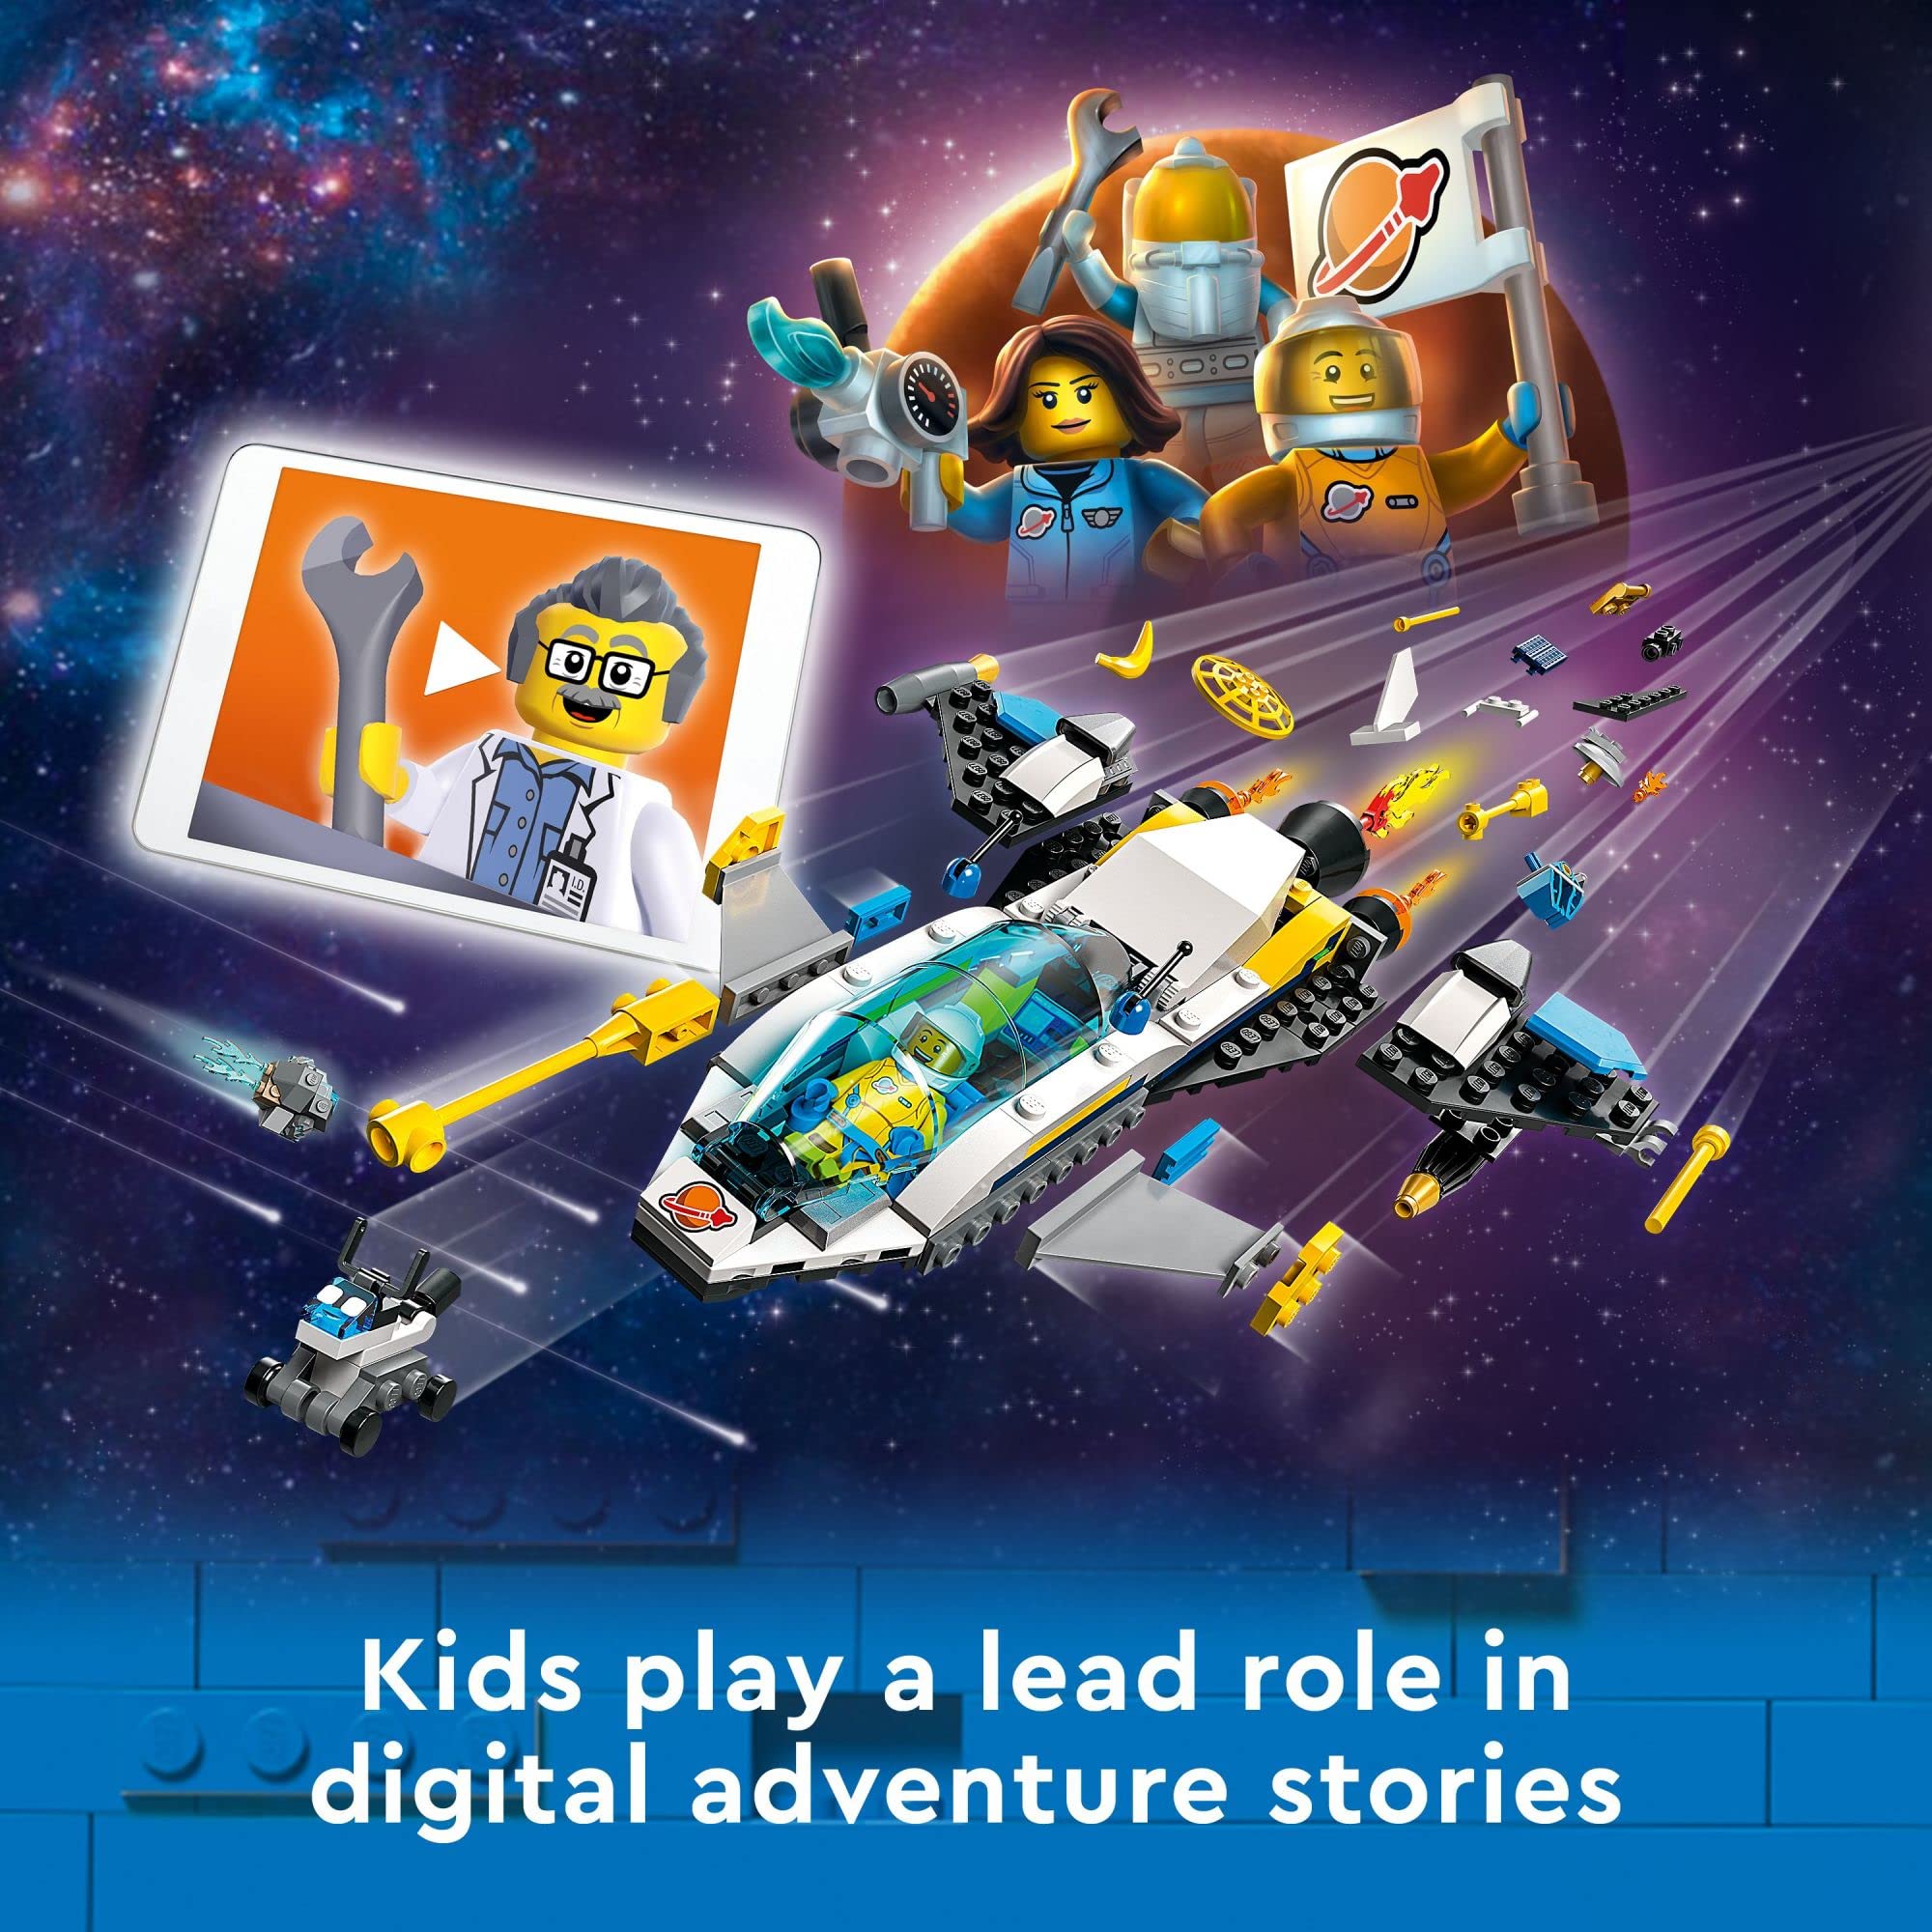 LEGO City Mars Spacecraft Exploration Missions 60354 Interactive Digital Building Toy Set - with Astronaut Minifigures and Spaceship, Traverse The Stars, Great Gift for Kids, Boys, and Girls Ages 6+